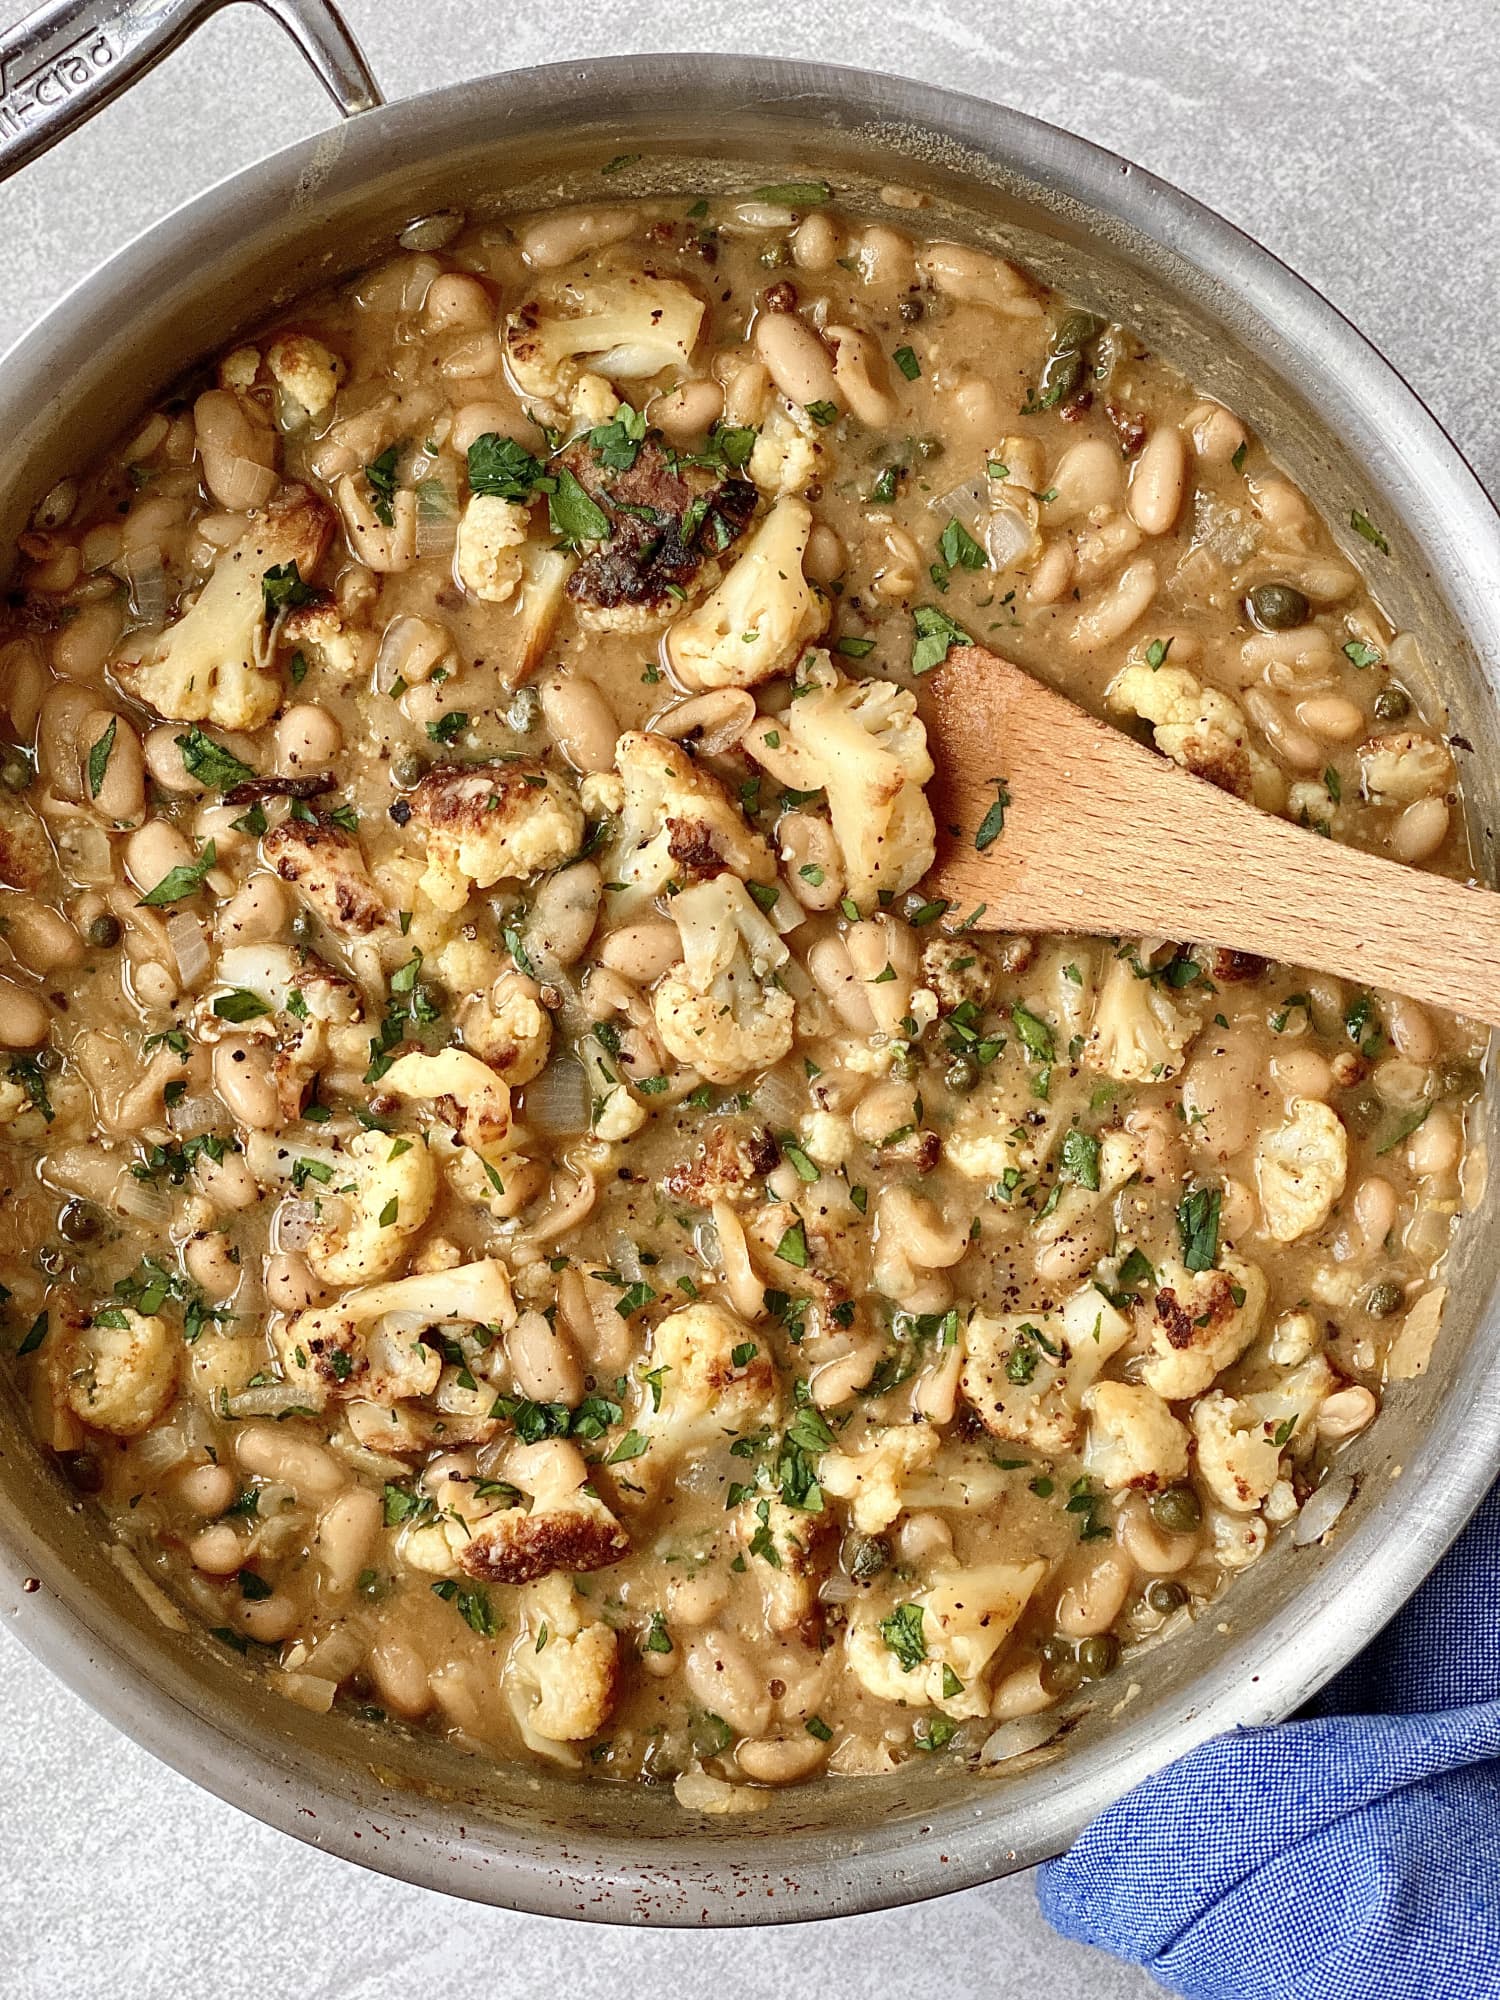 Braised Cauliflower and White Bean Piccata Is the Tight Budget Recipe I Rely On